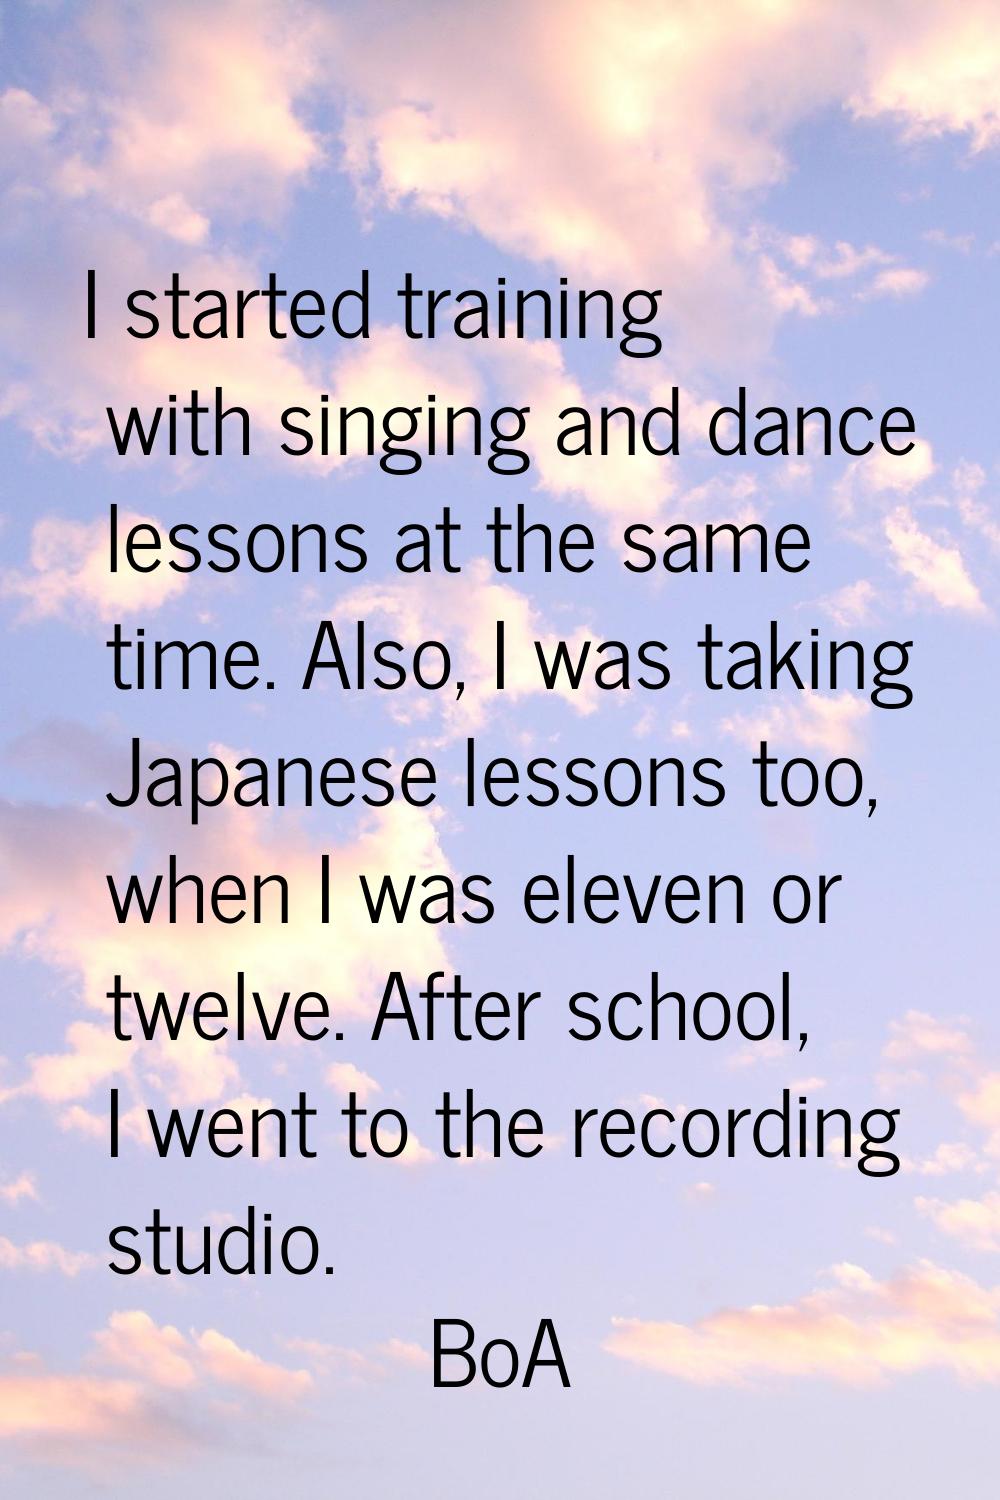 I started training with singing and dance lessons at the same time. Also, I was taking Japanese les